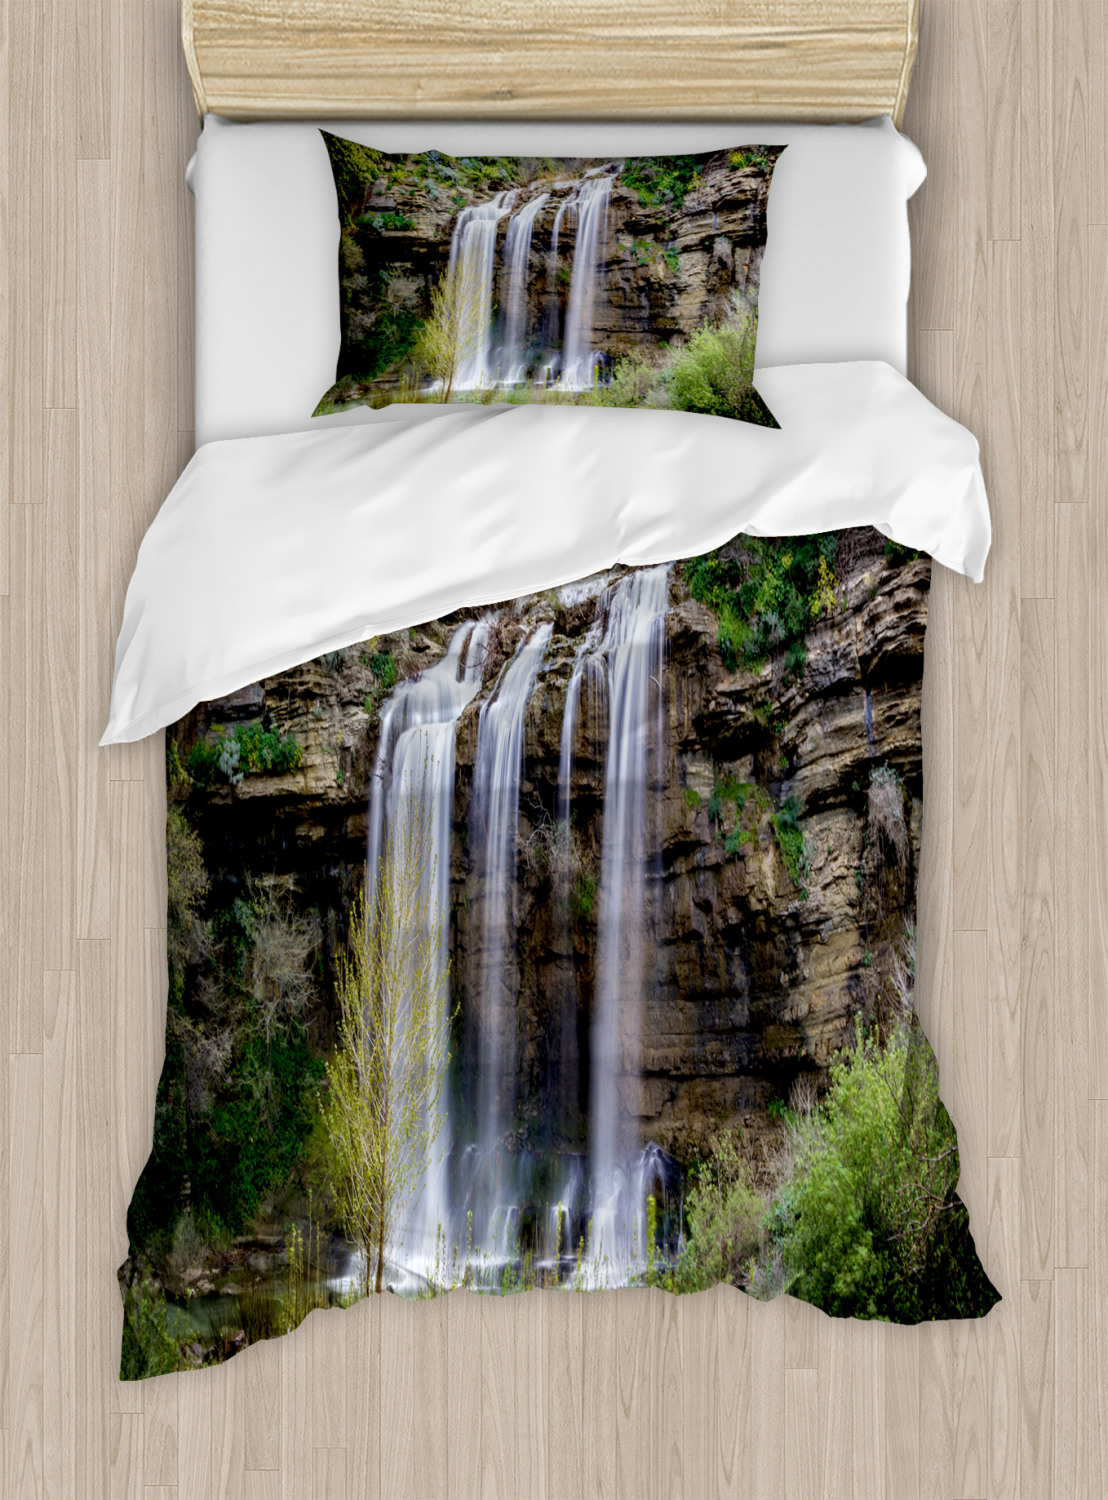 Details about   Nature Quilted Bedspread & Pillow Shams Set Waterfall Forest Sicily Print 